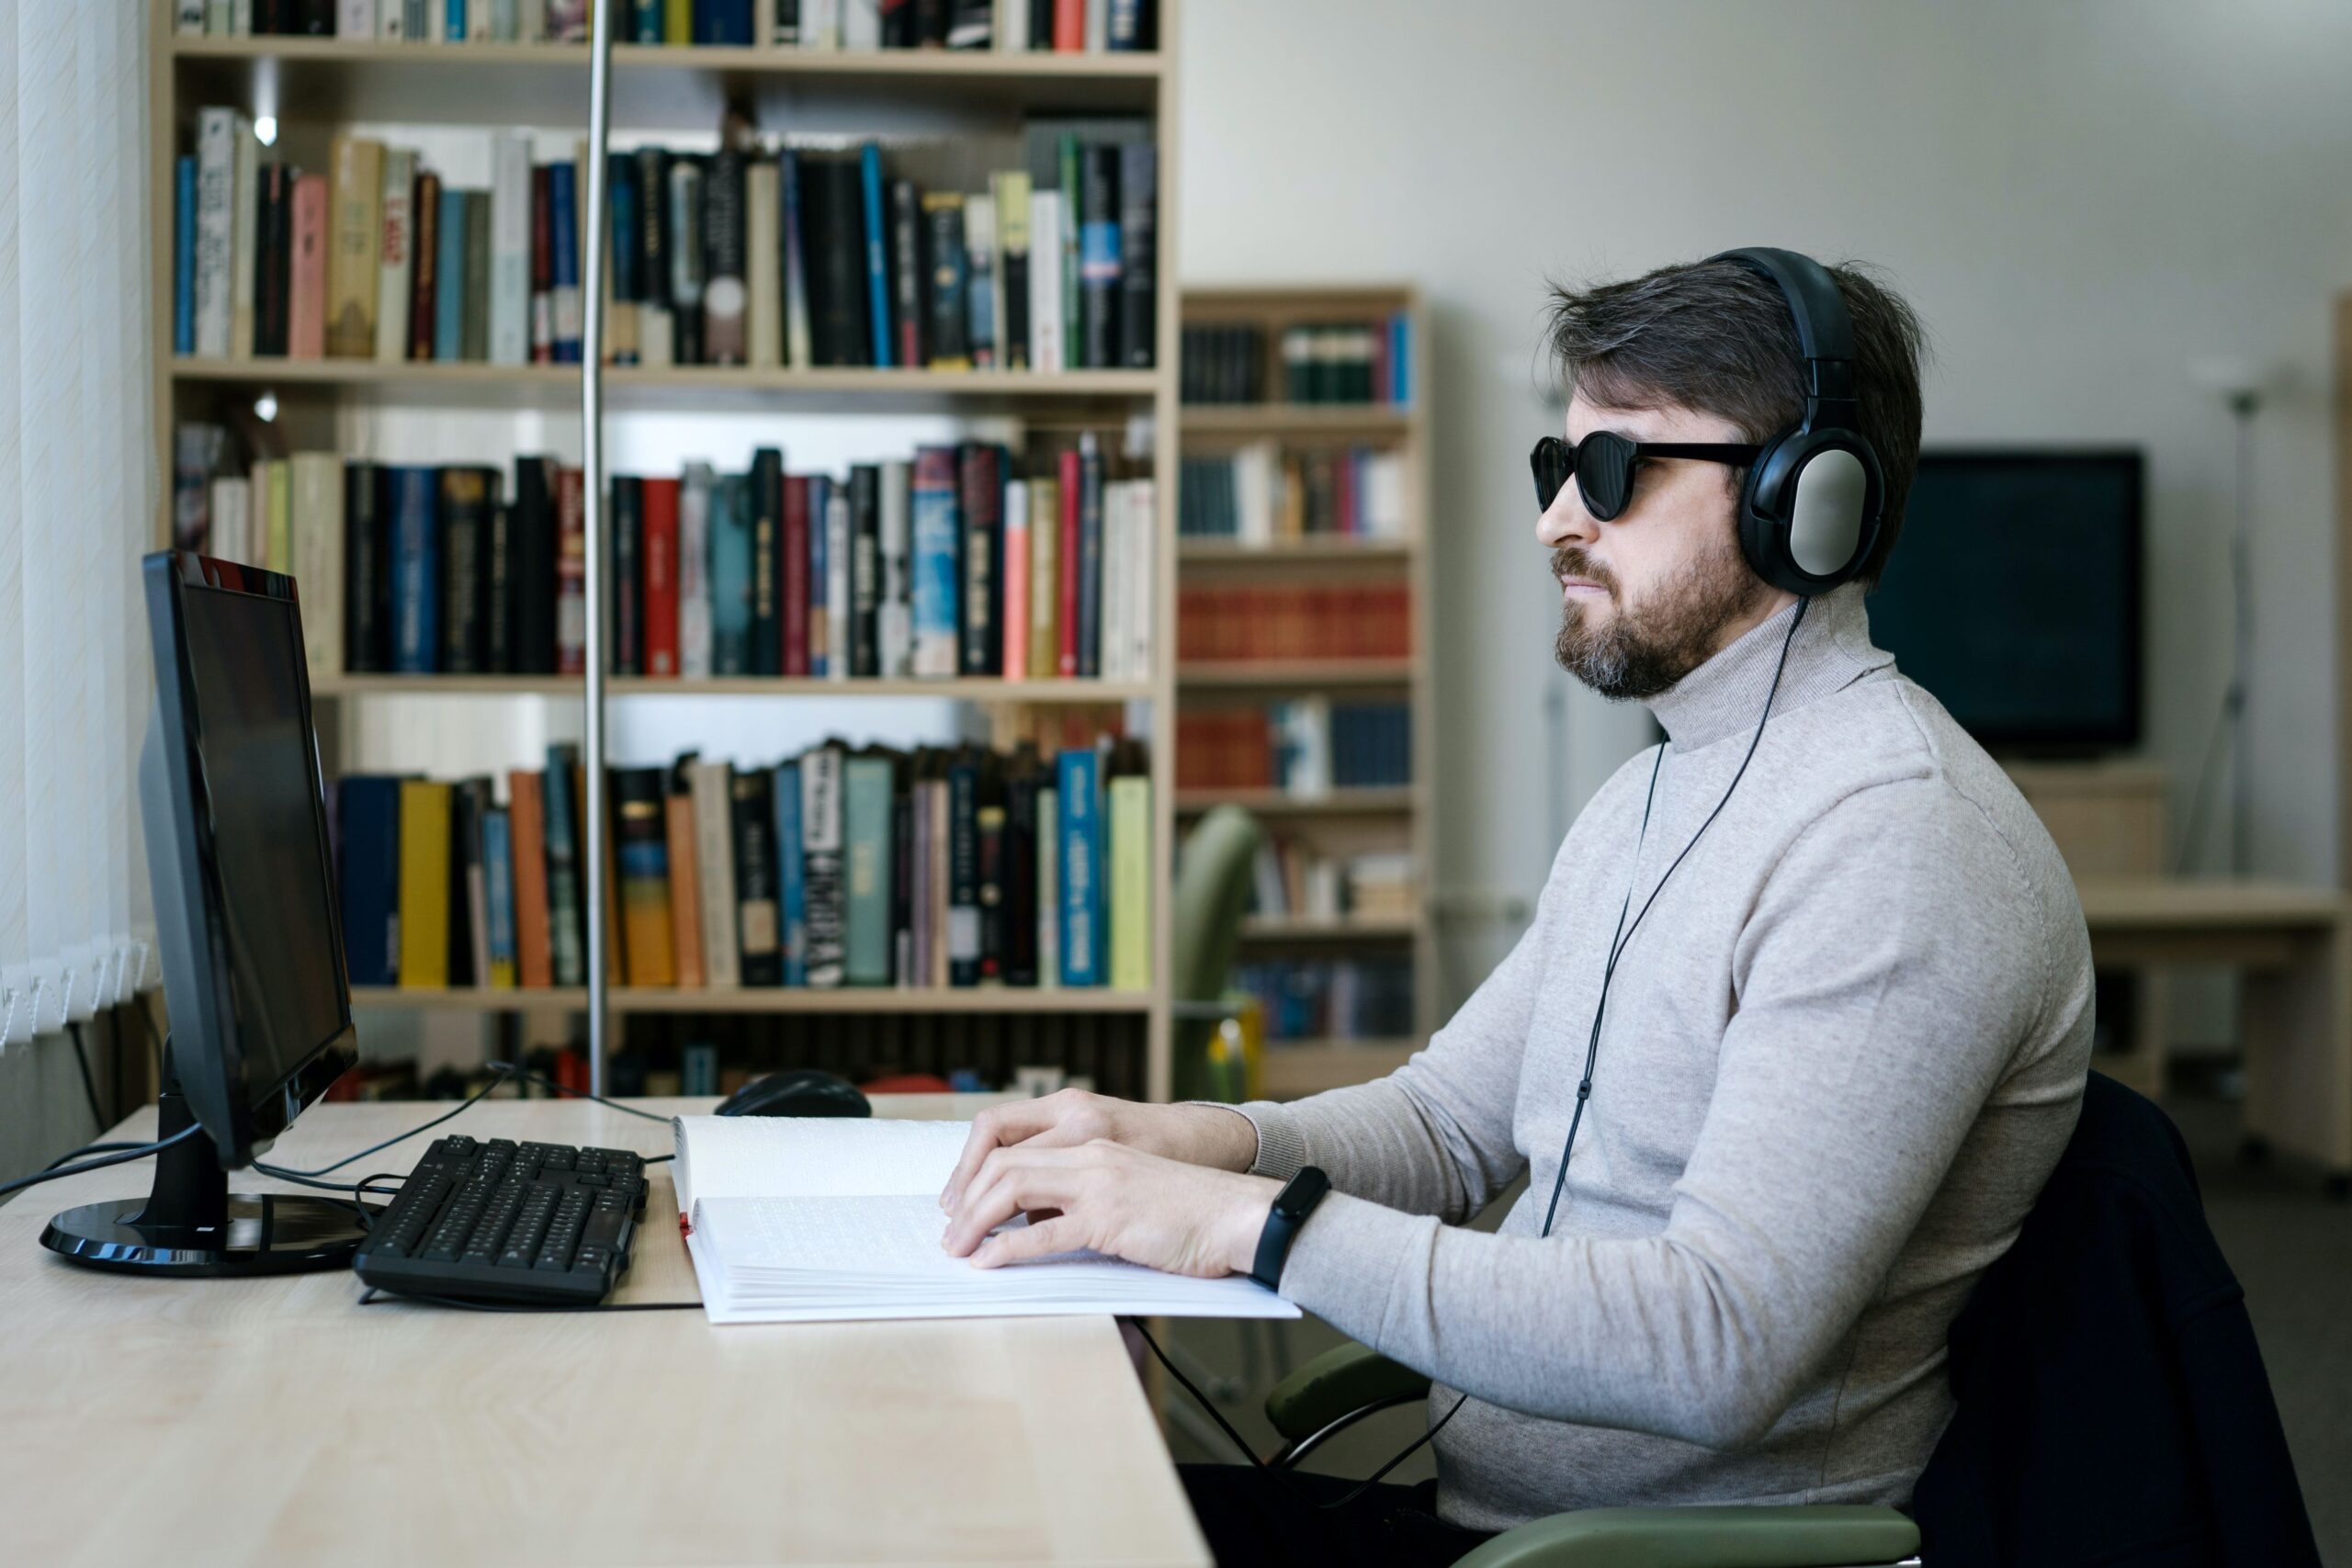 Photo of a blind person sitting at a desk in front of a computer. The man is wearing sunglasses and over-ear headphones. His hands are outstretched on a Braille book. There is a bookcase against the wall in the background. Photo by Nataliya Vaitkevich on Pexels.